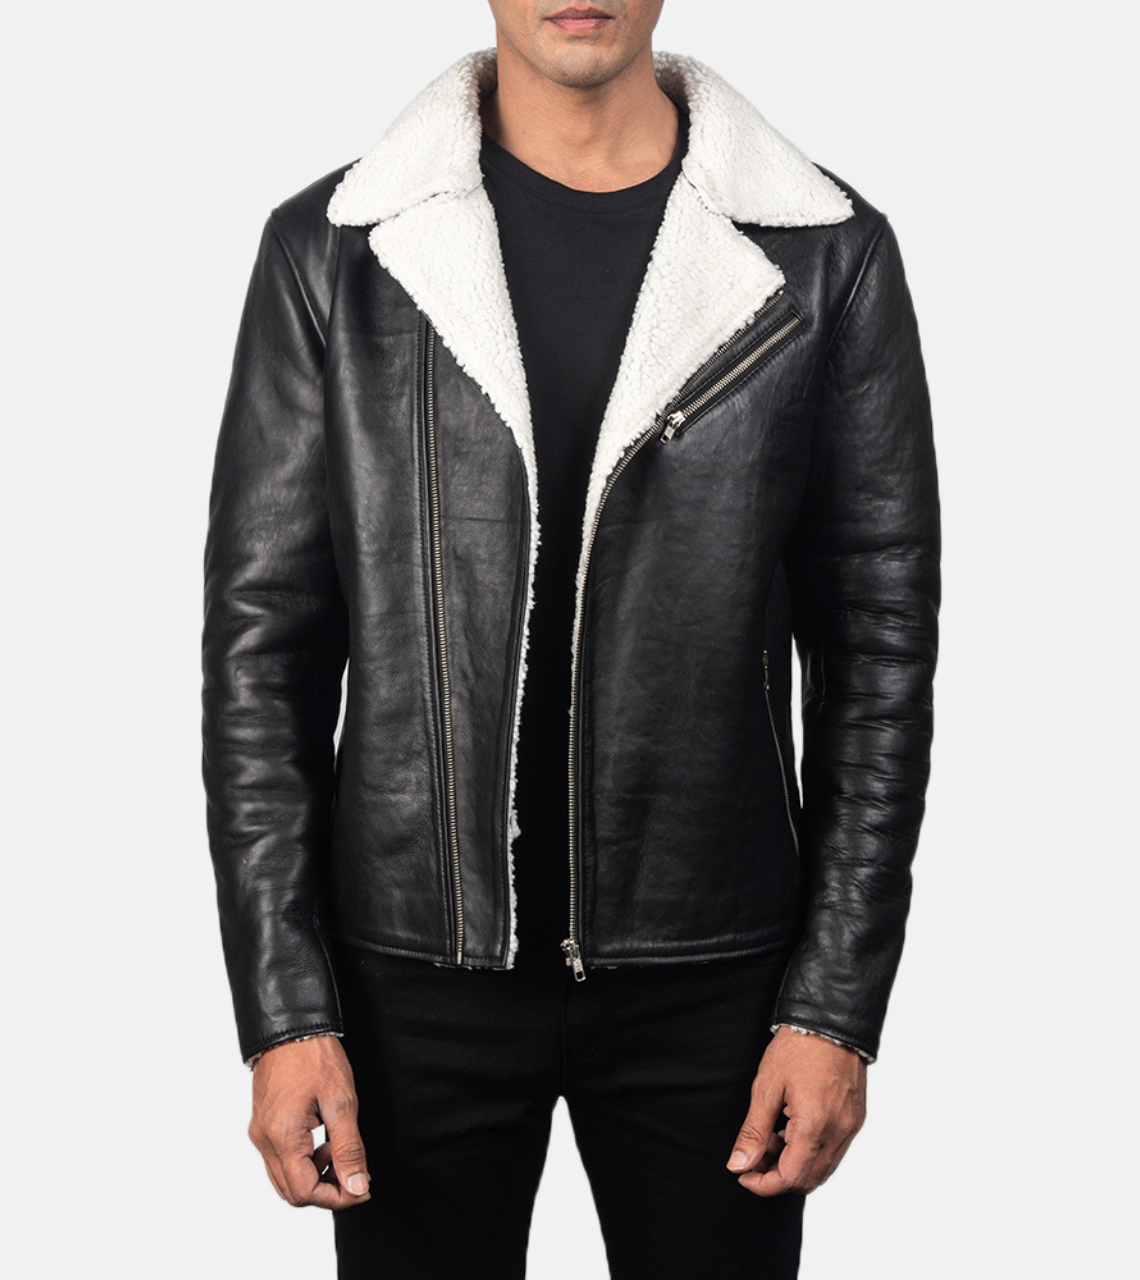  Pacific White Shearling Men's Leather Bomber Jacket 